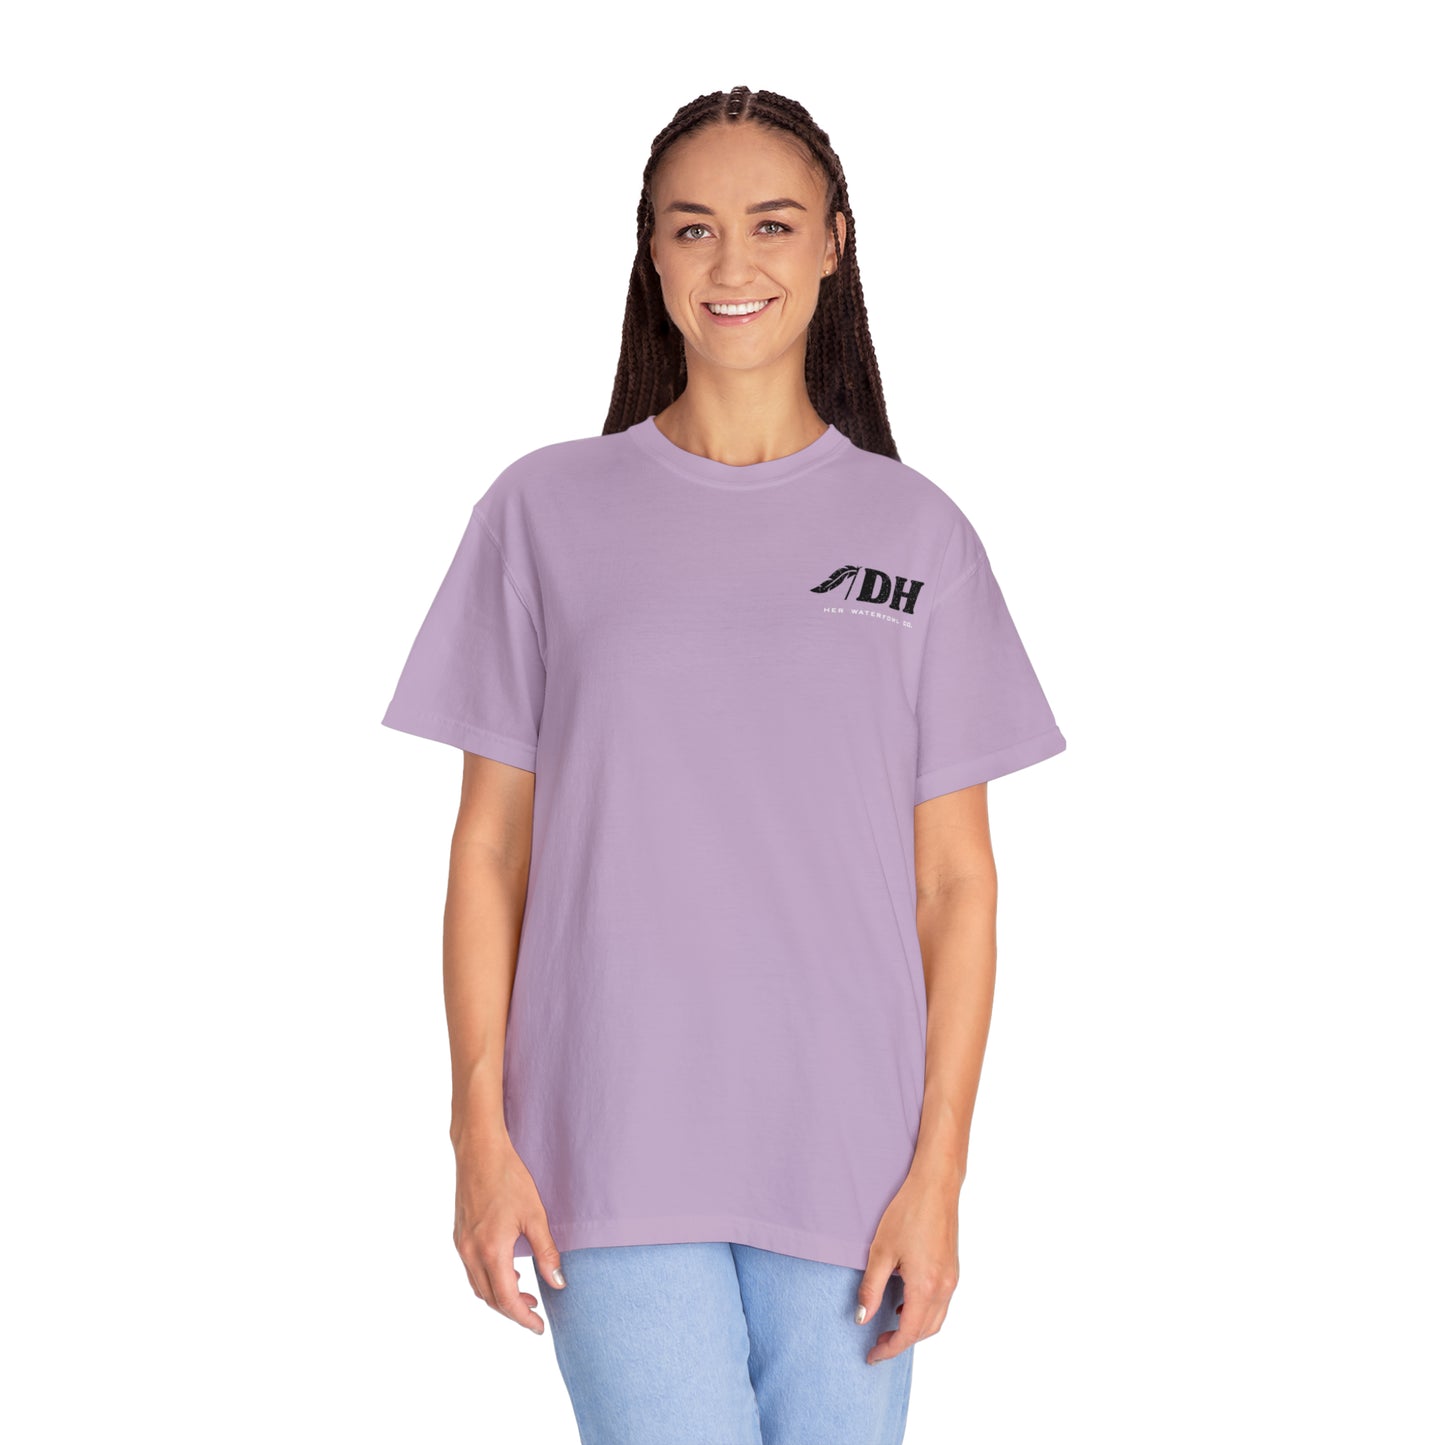 Raise 'Em Right Tee (New Fall Colors)